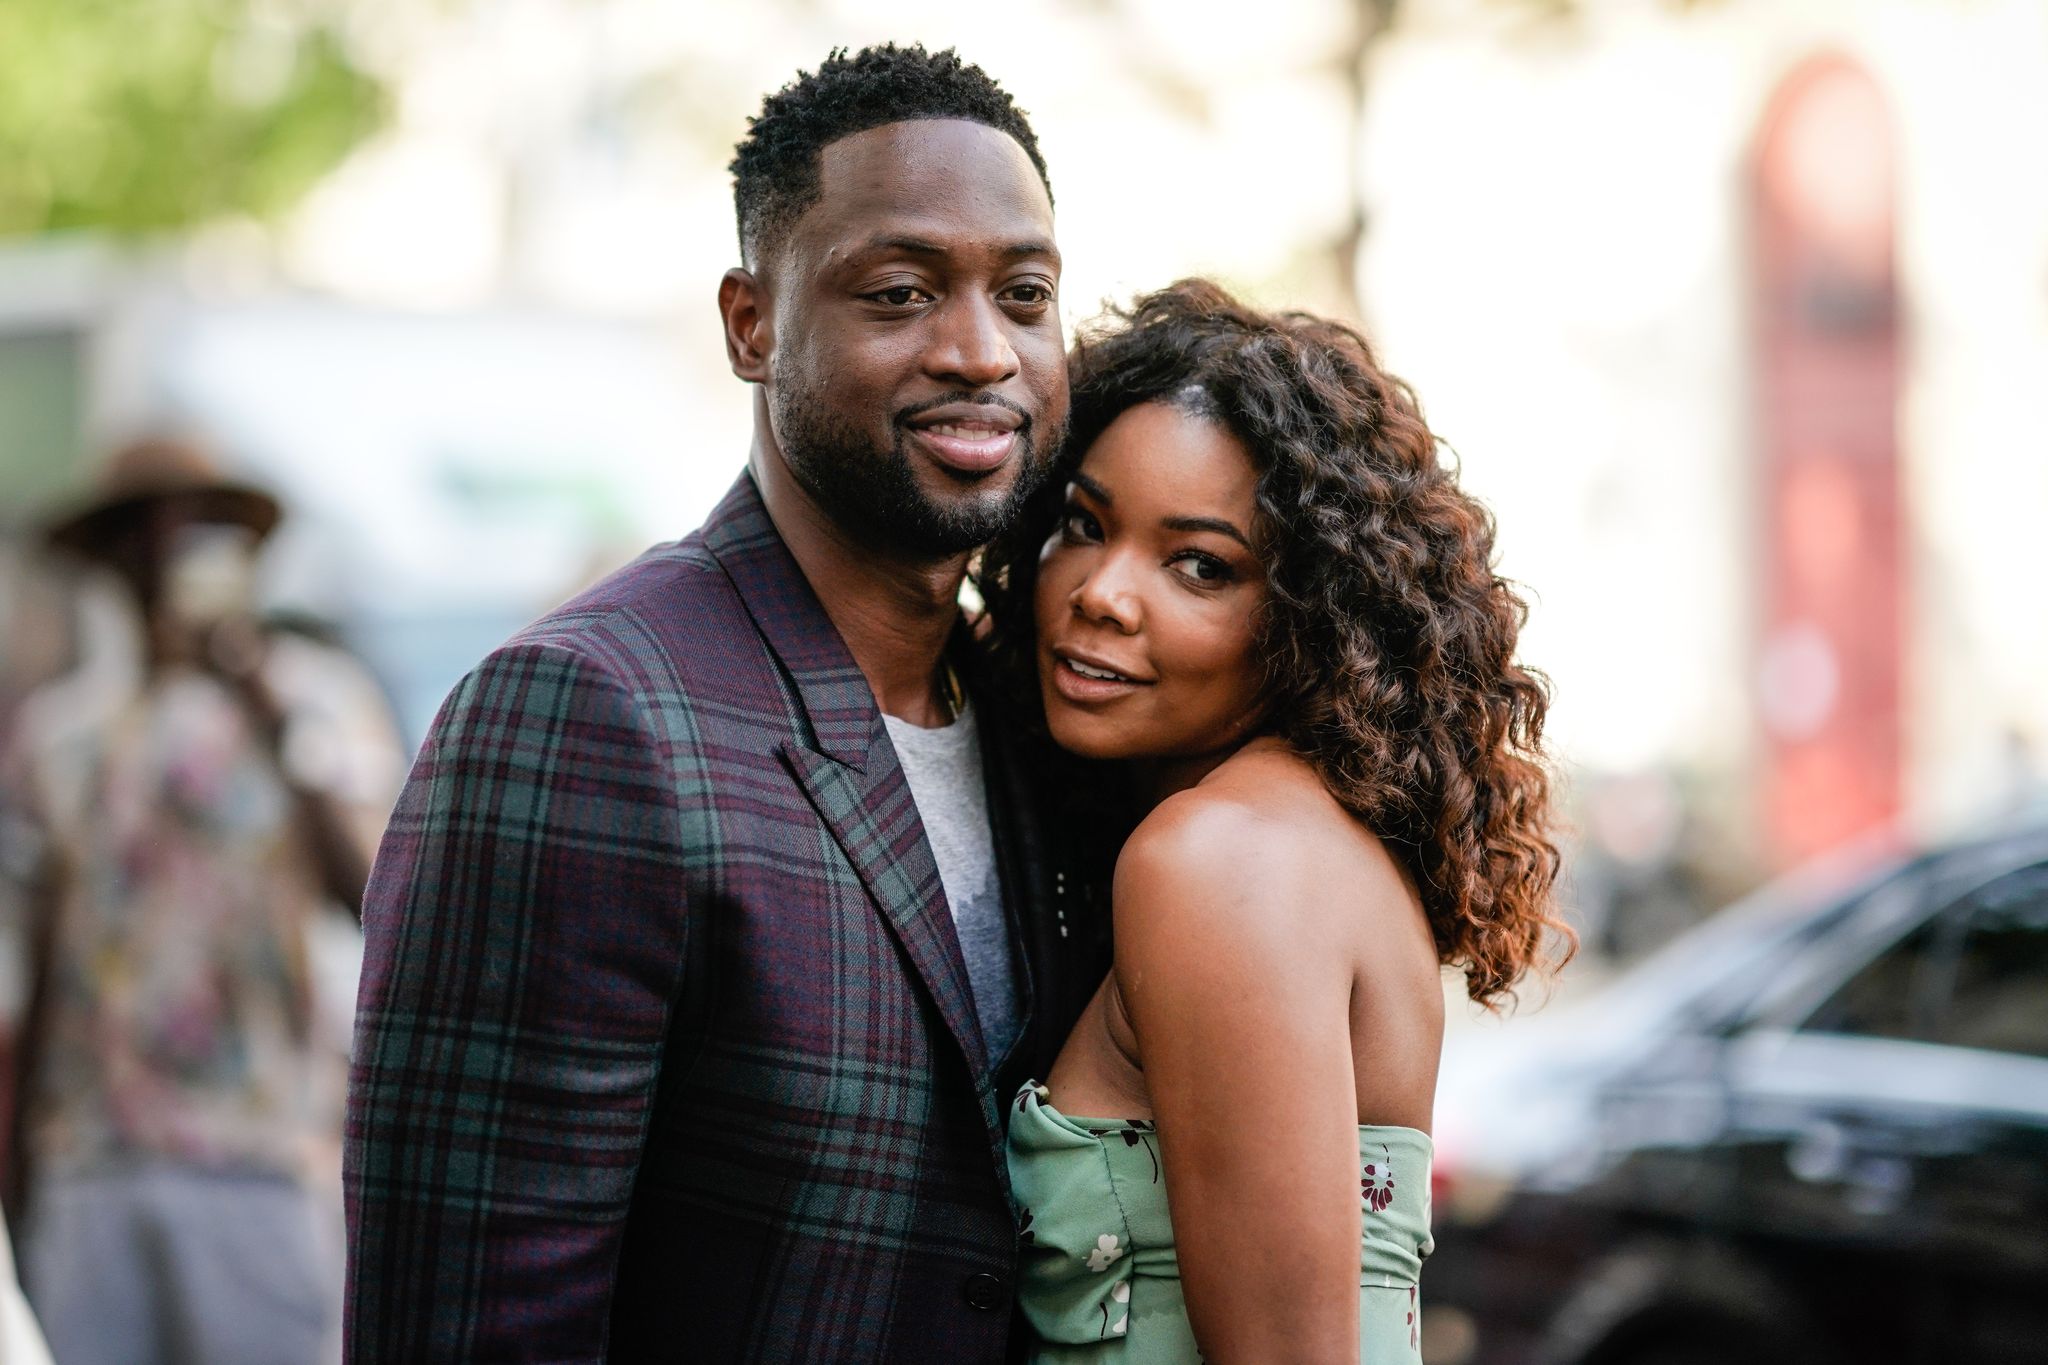 Dwyane Wade and wife Gabrielle Union at the Paris Fashion Week 2018 in June 21, 2017 in Paris, France | Source: Getty Images